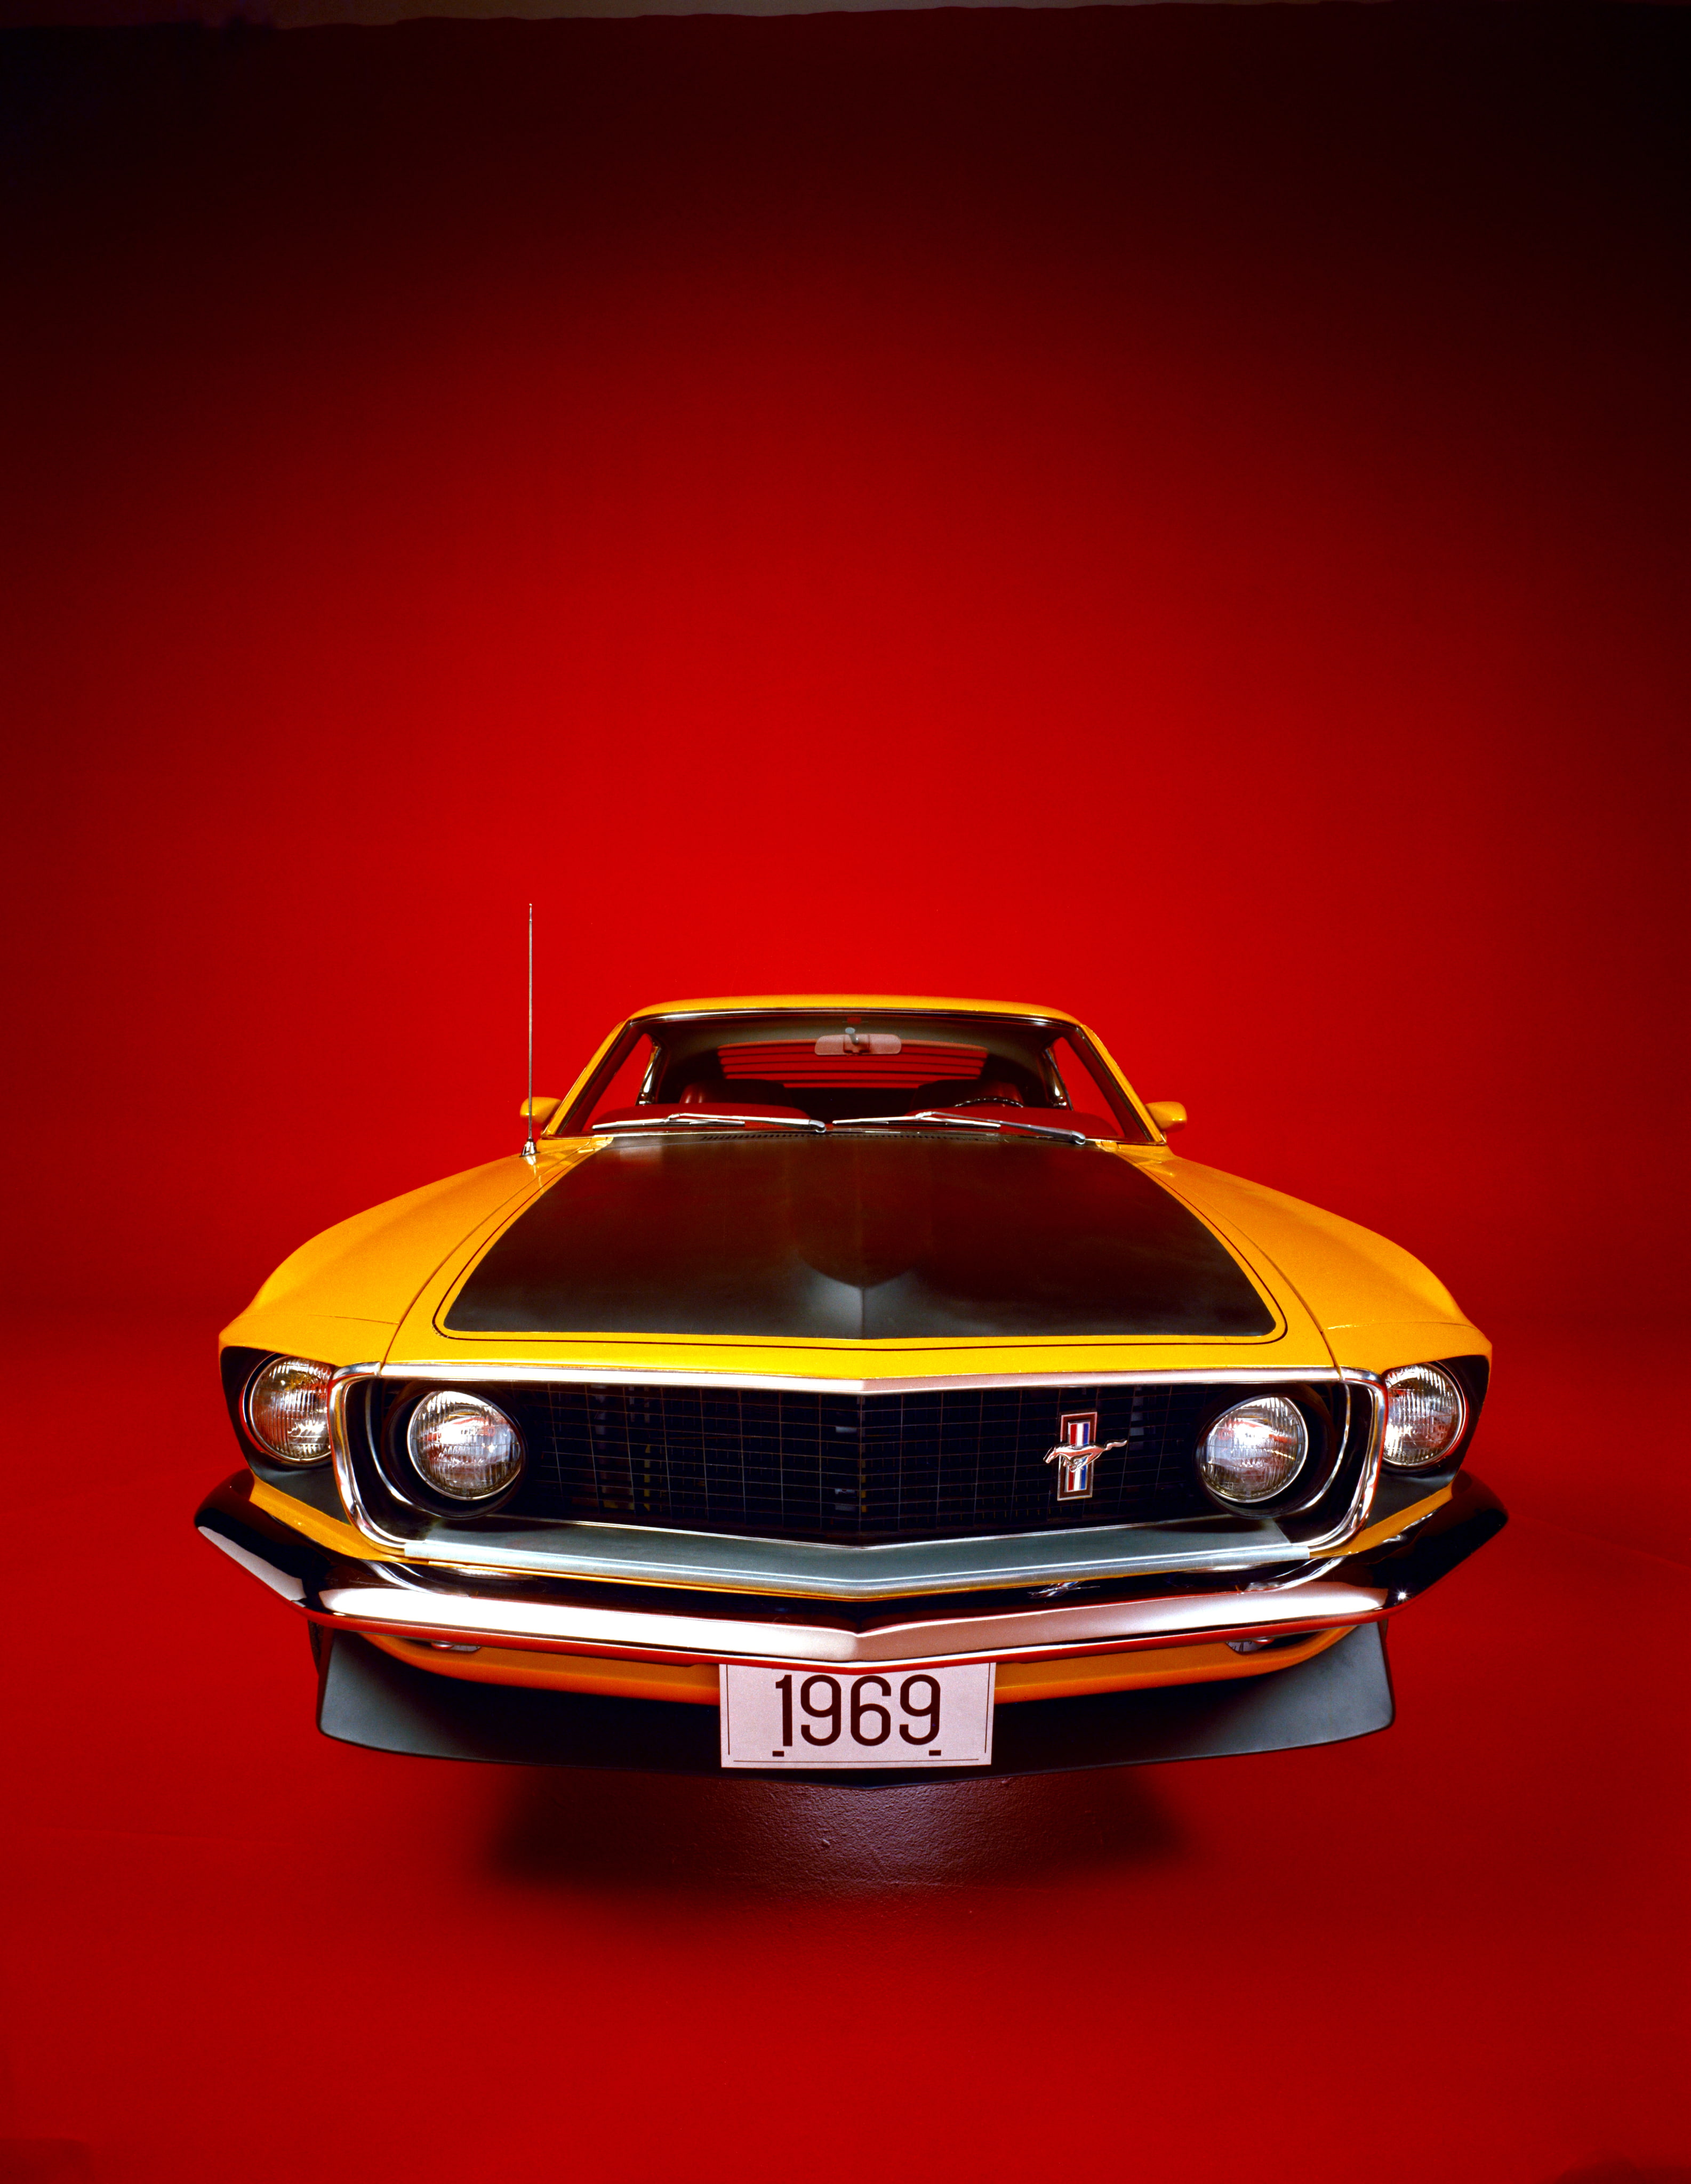 1969, 302, boss, classic, ford, muscle, mustang, red, car, studio shot